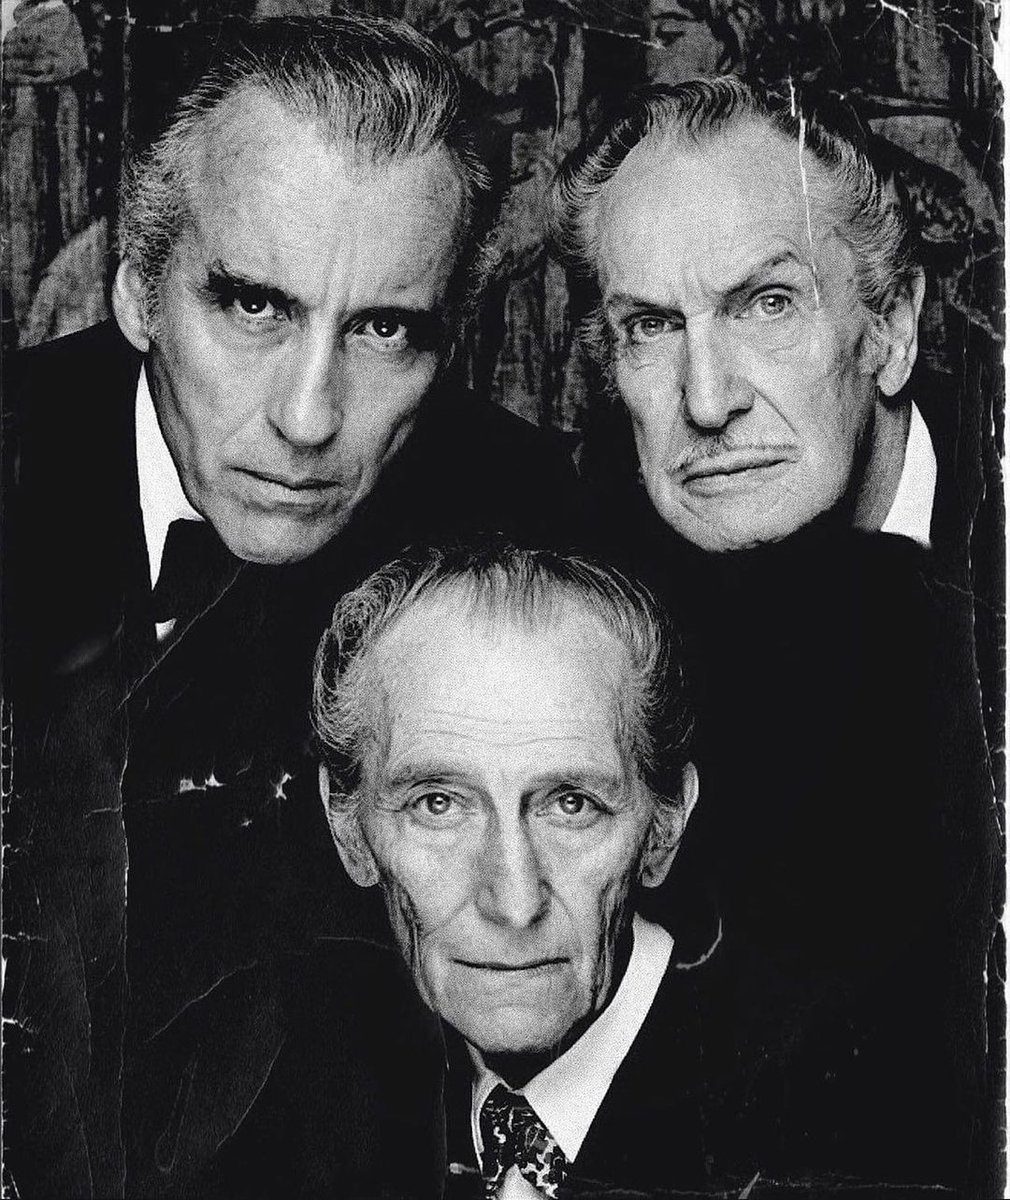 Happy Birthday to these three horror legends…

Peter Cushing, born May 26th 1913
Vincent Price, born May 27th 1911
Christopher Lee, born May 27th 1922